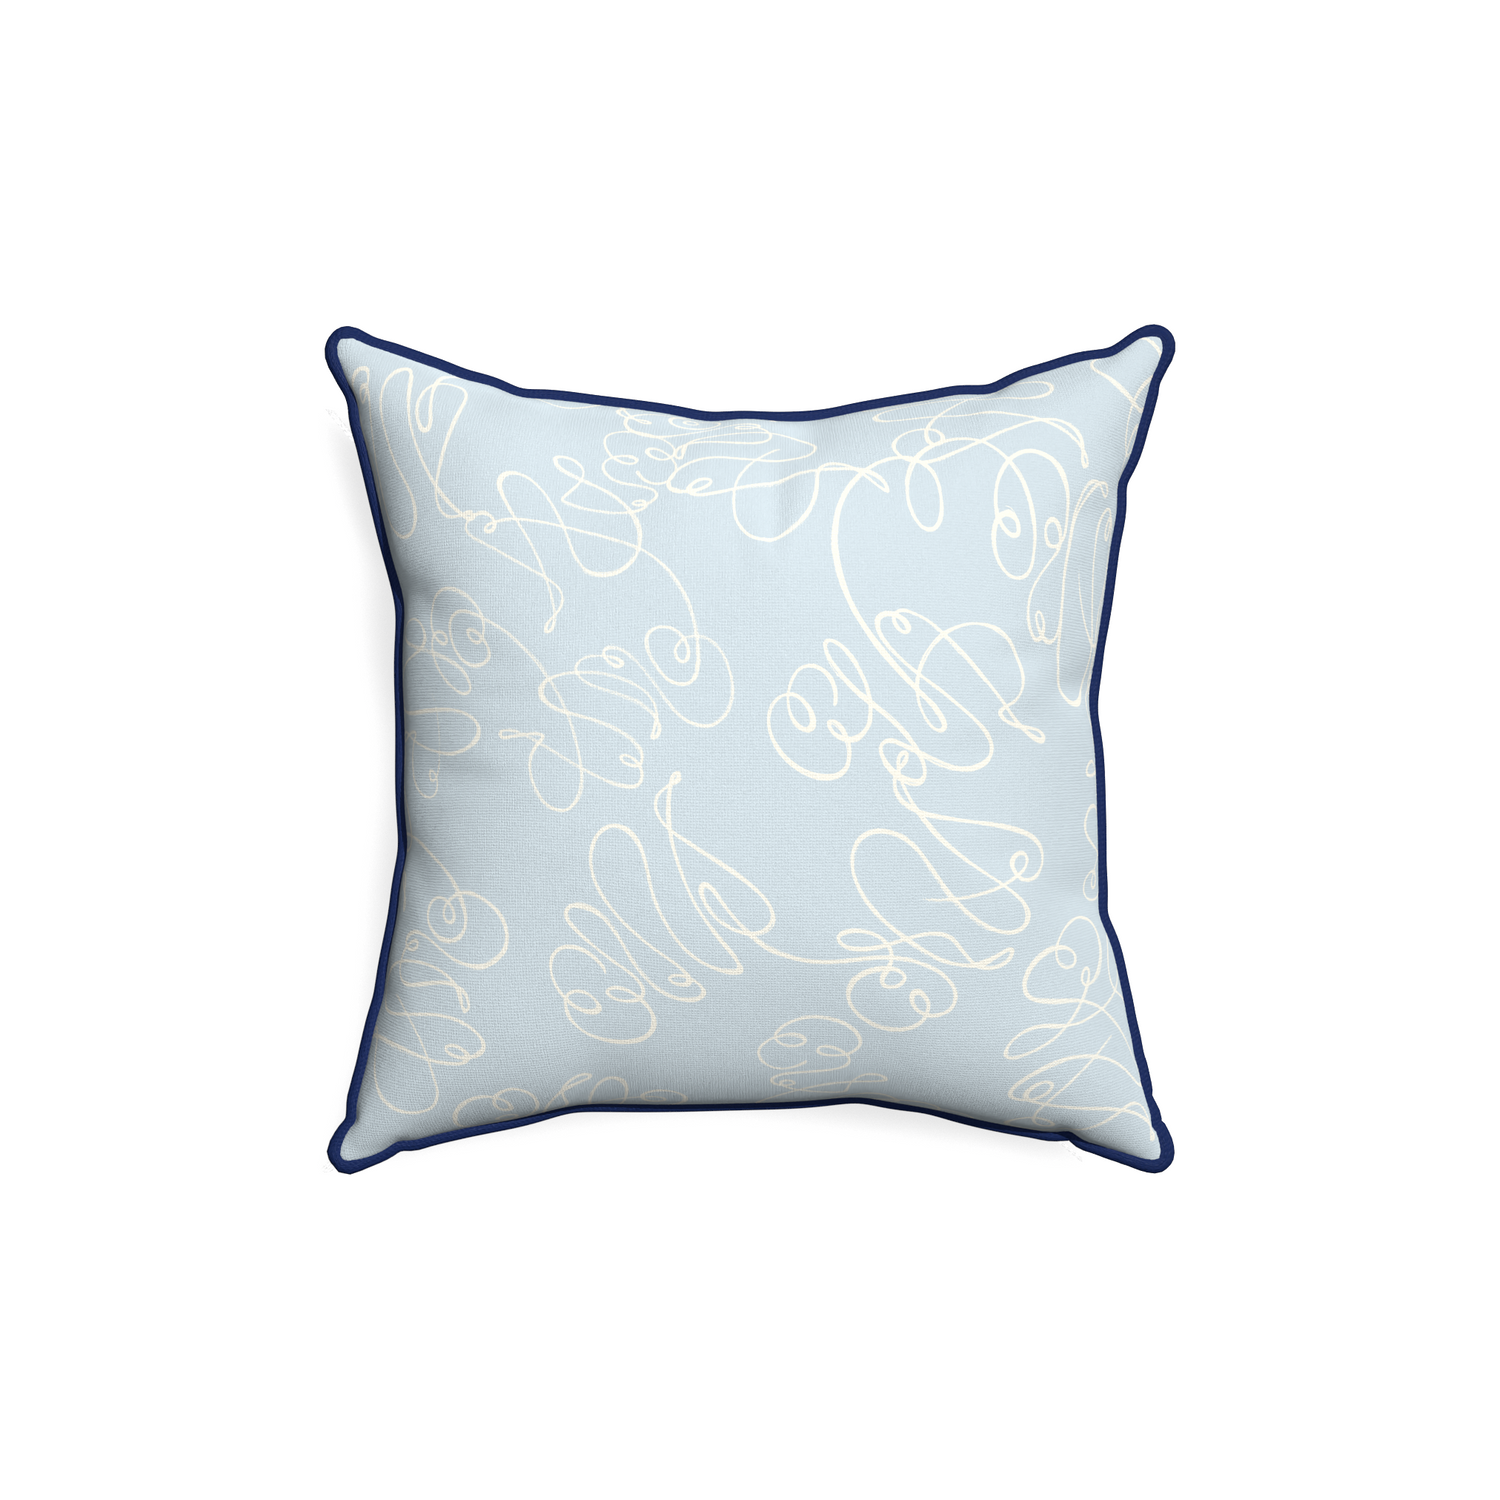 18-square mirabella custom pillow with midnight piping on white background